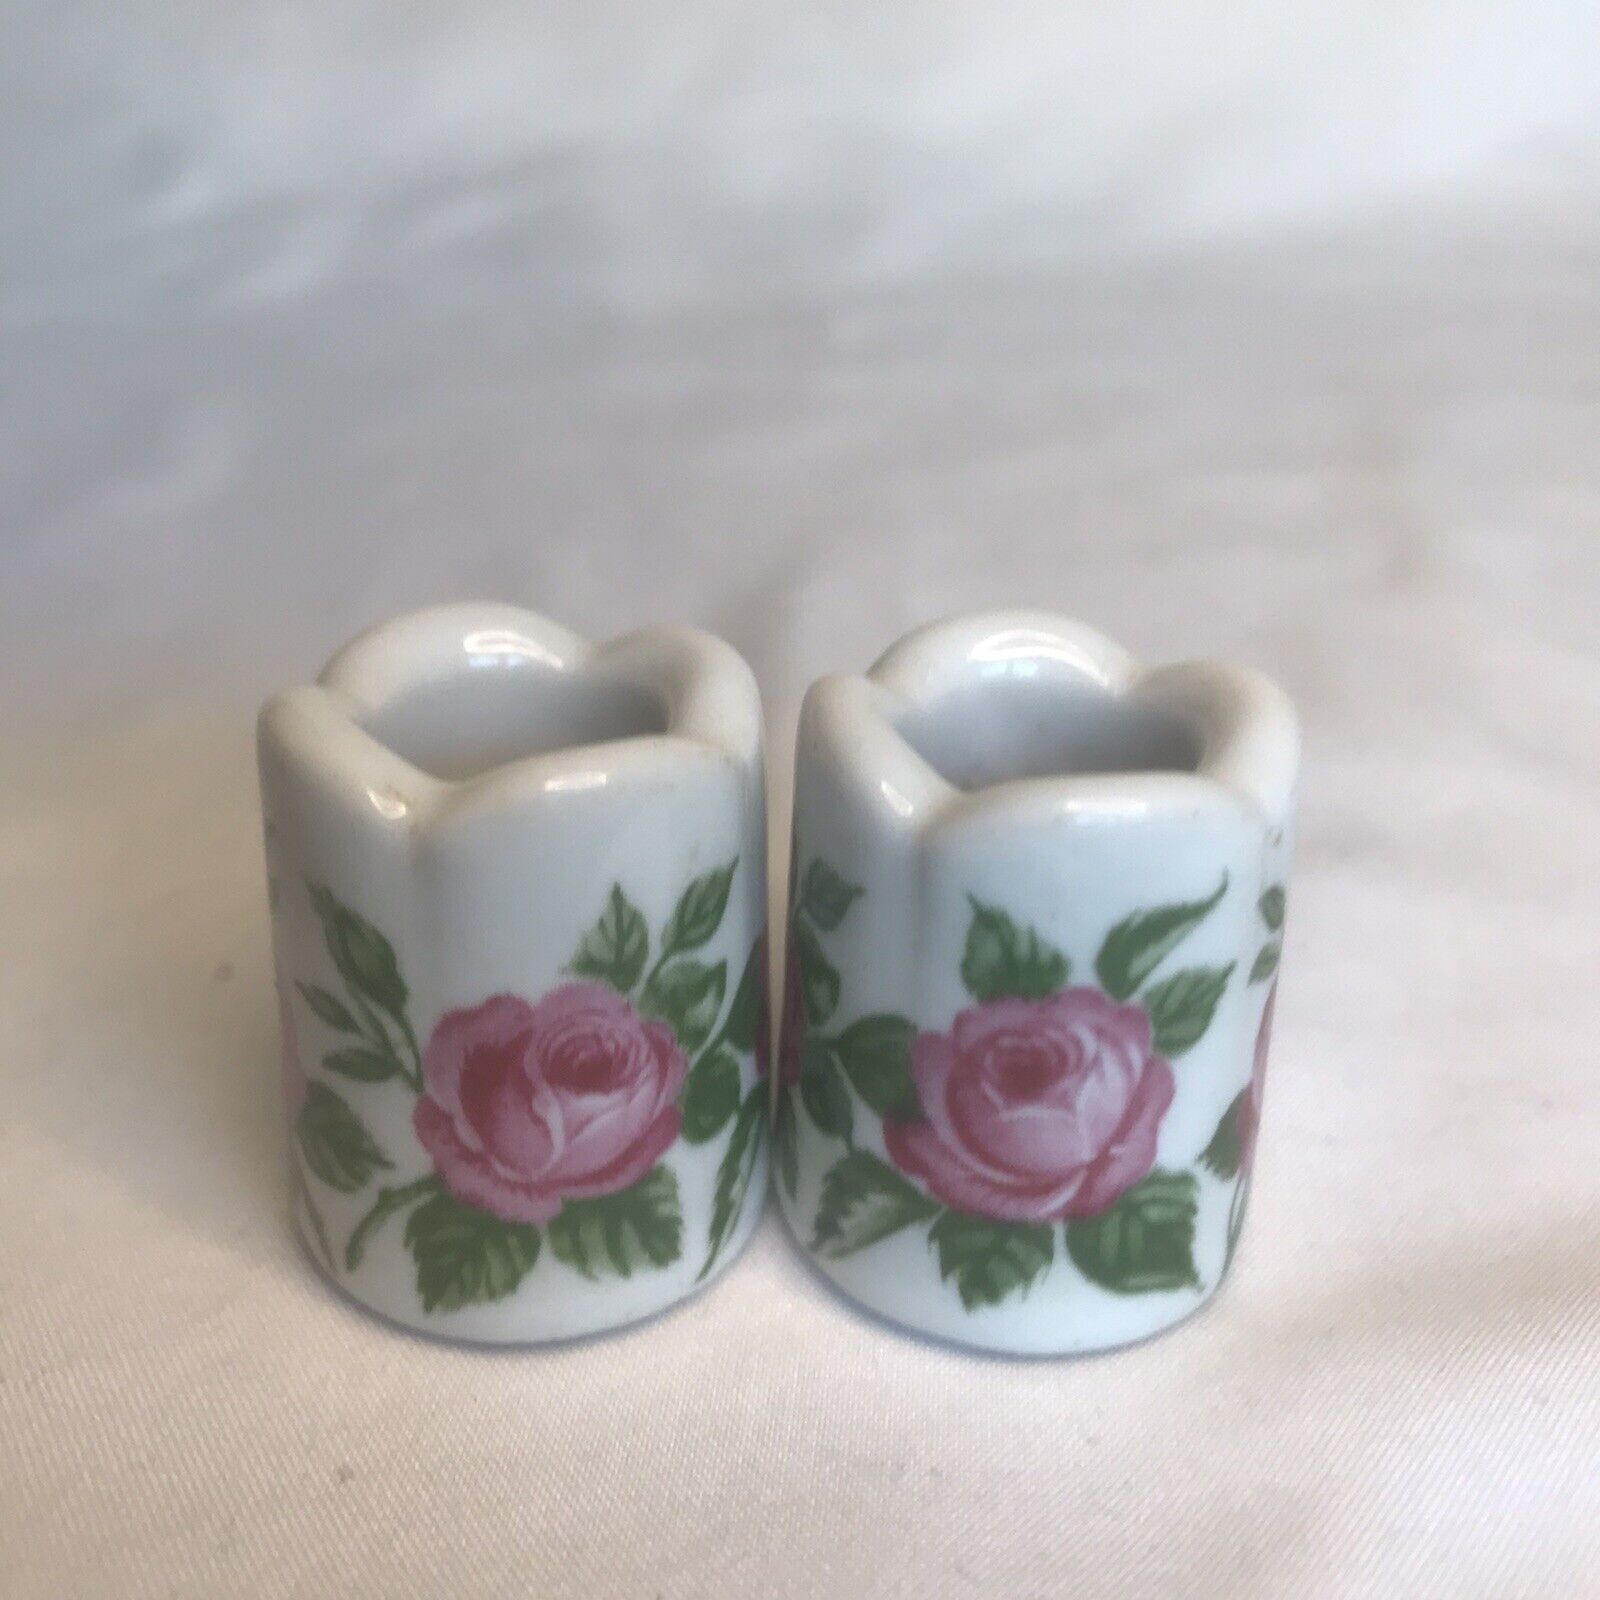 Miniature thimble size candle - Toothpick Holder - Vase roses Made in Germany